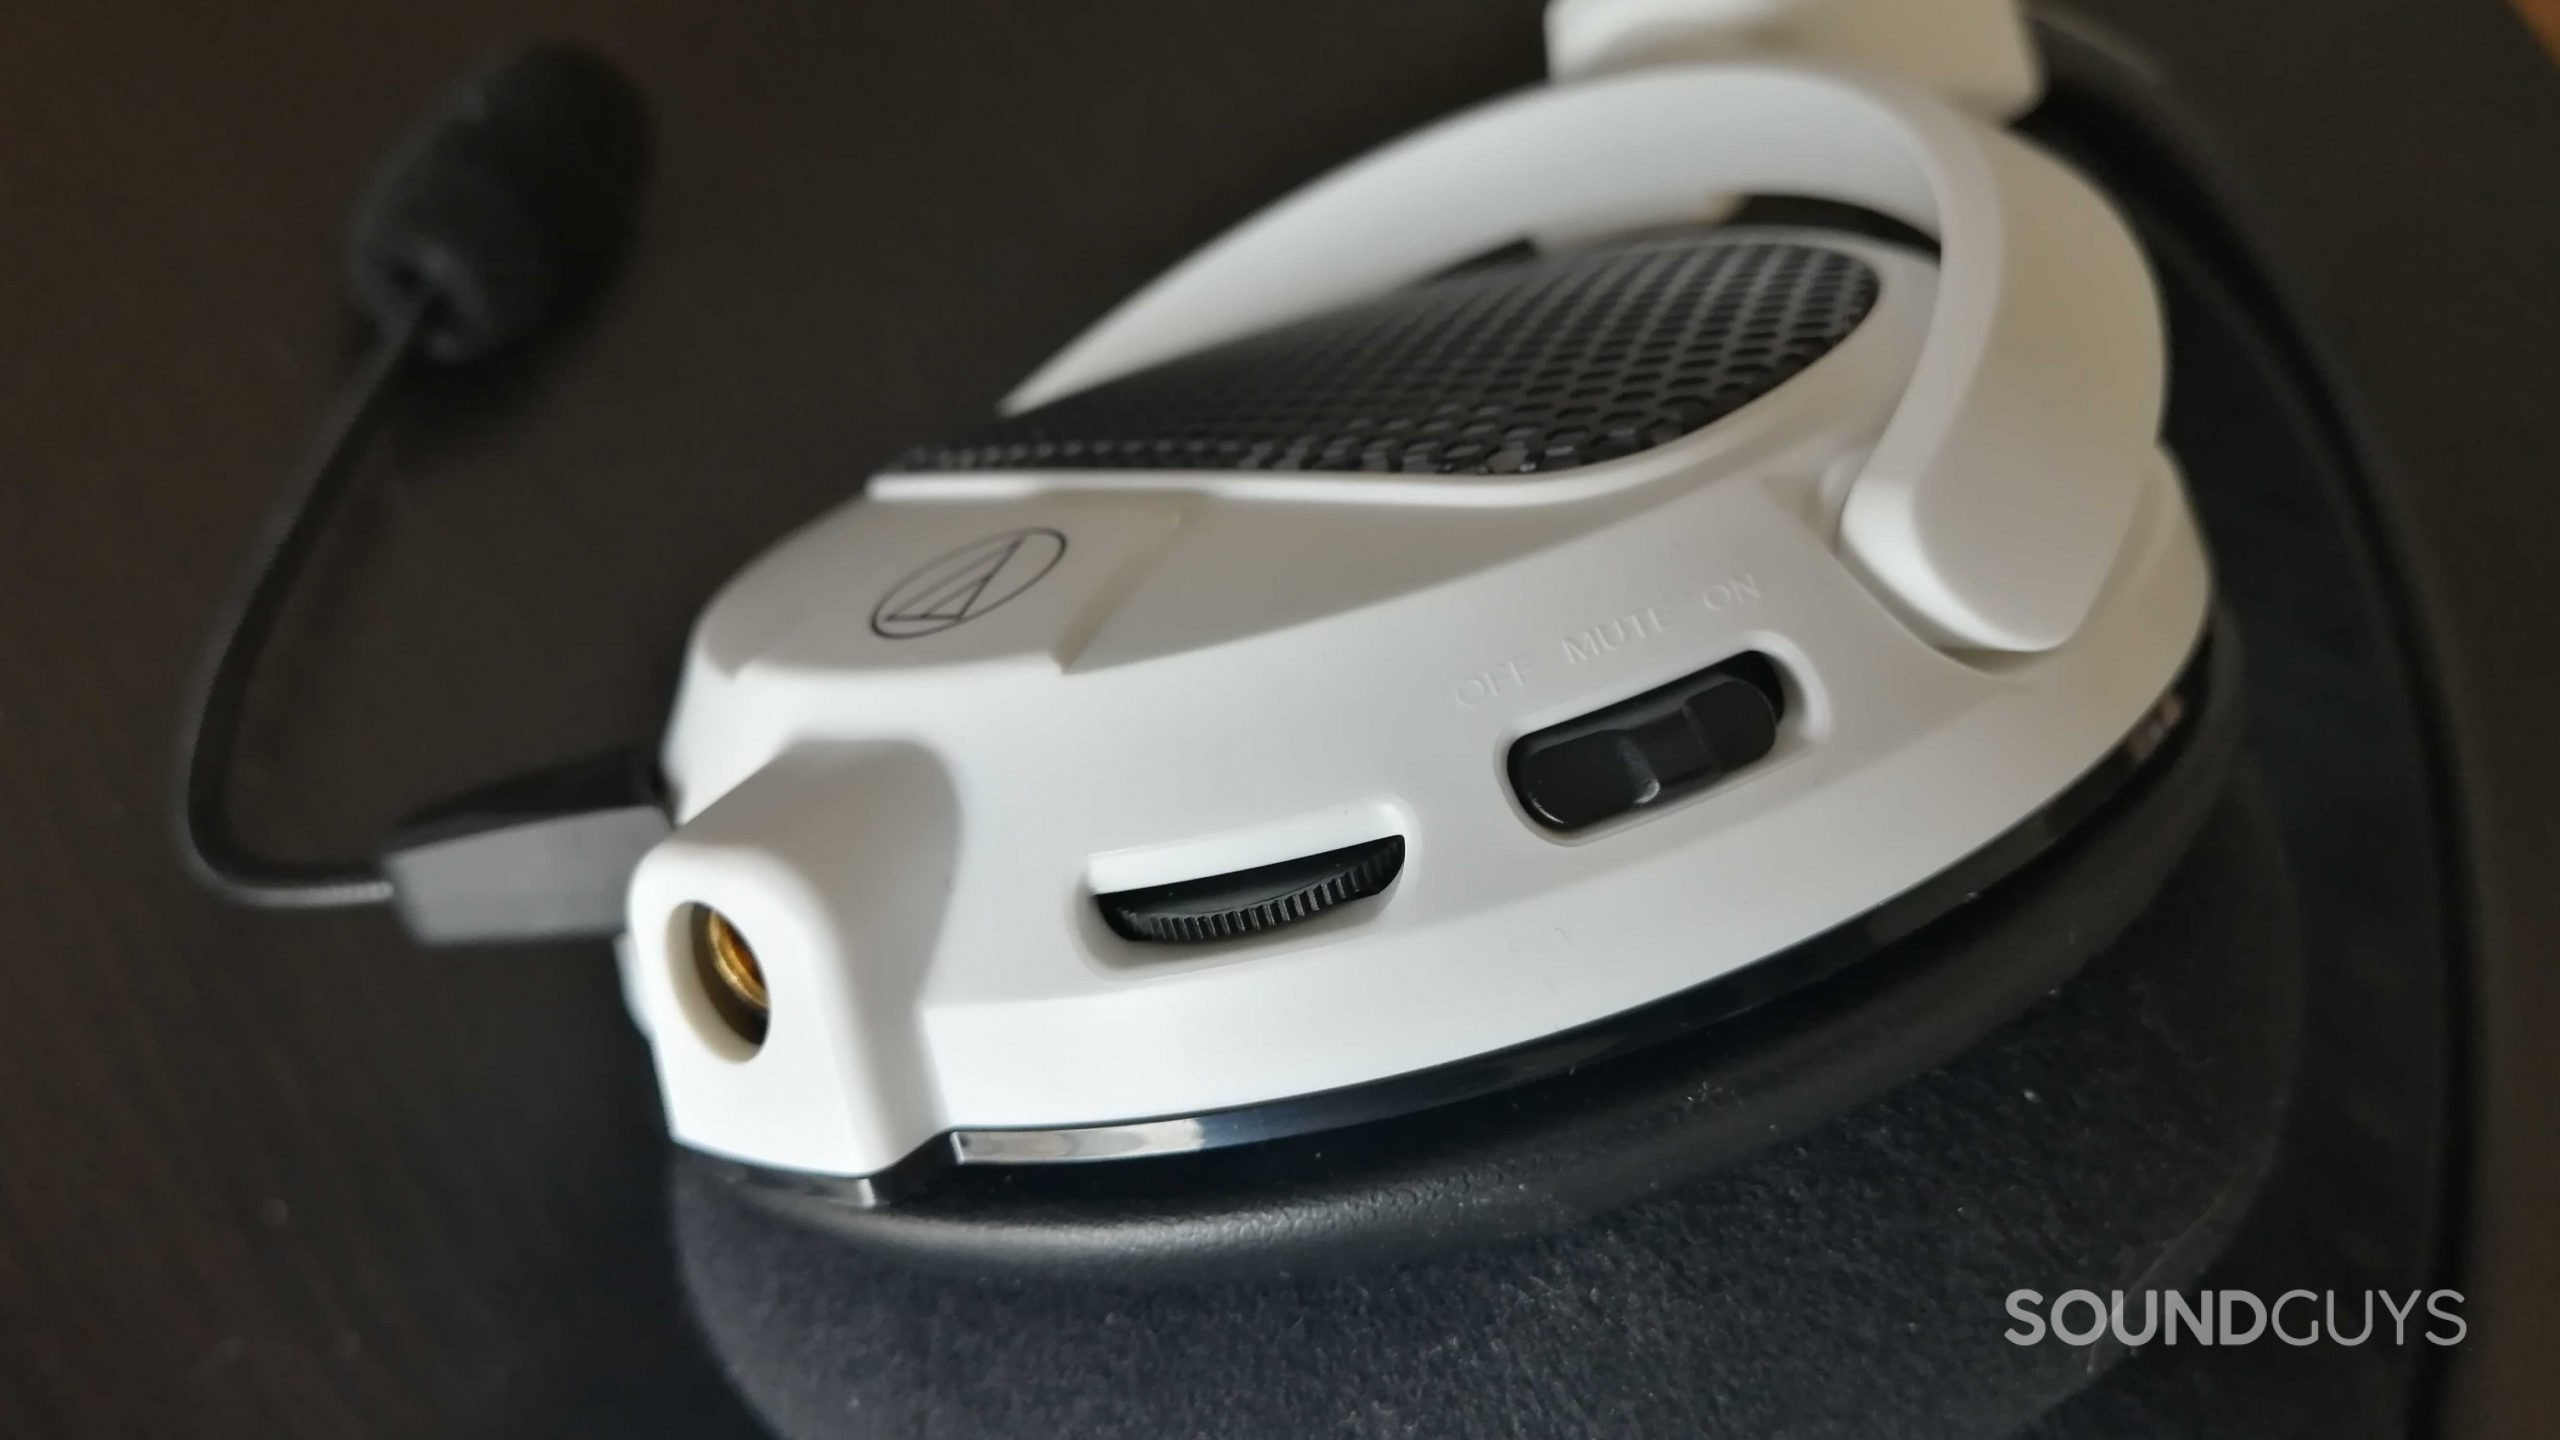 A closeup view of the volume controls and mute button on the Audio-Technia ATH-GDL3 headset